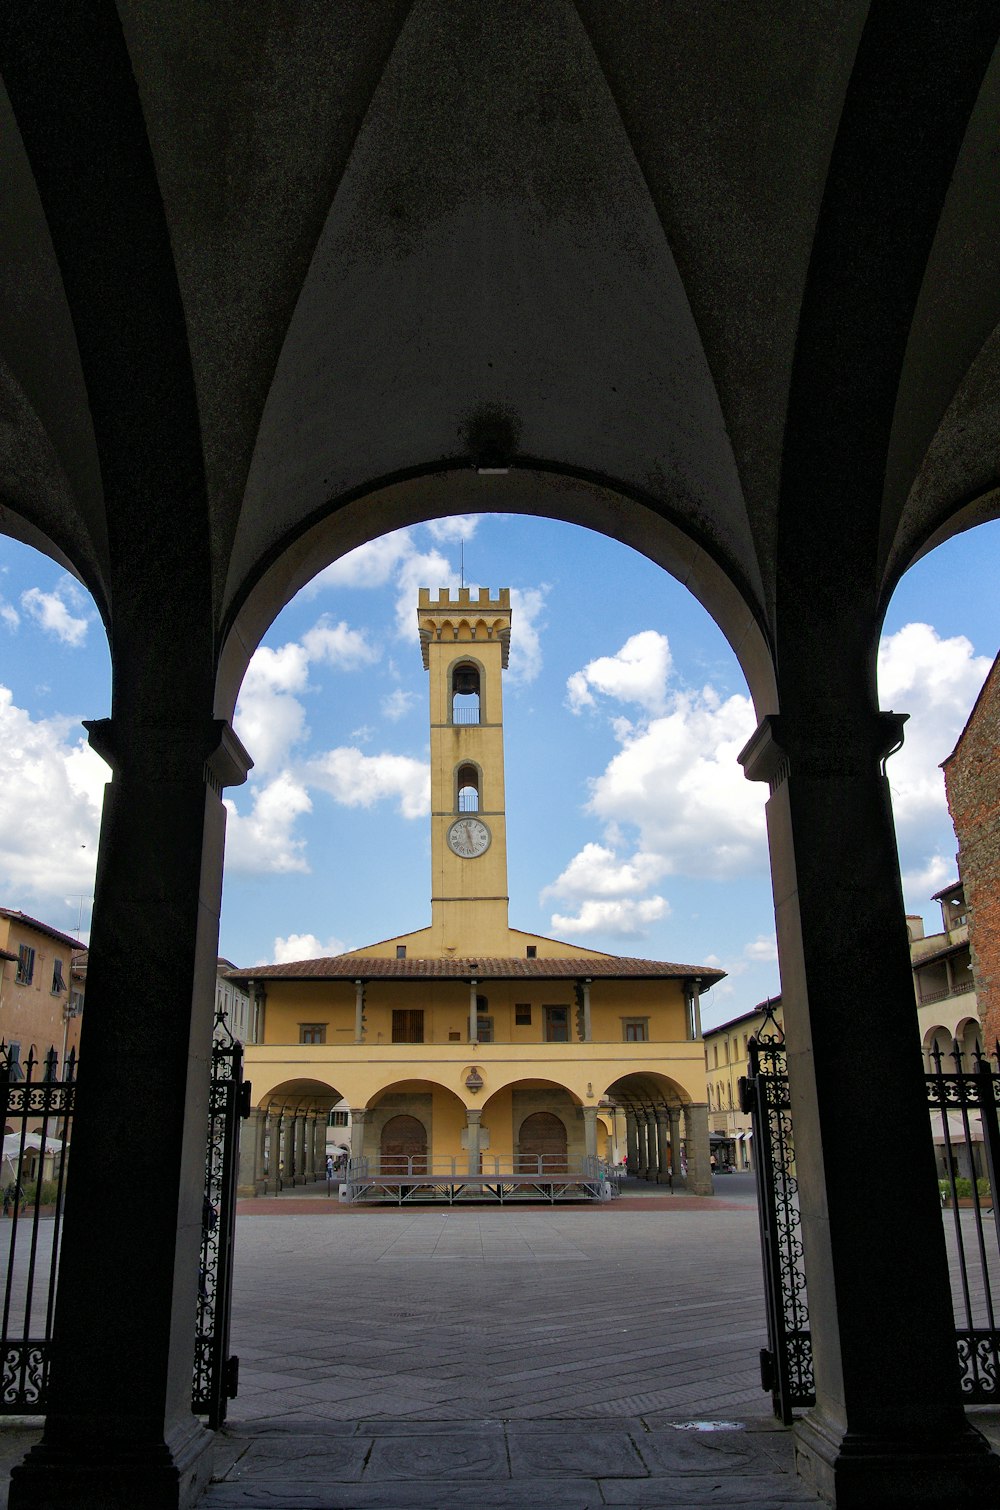 a clock tower is seen through an archway